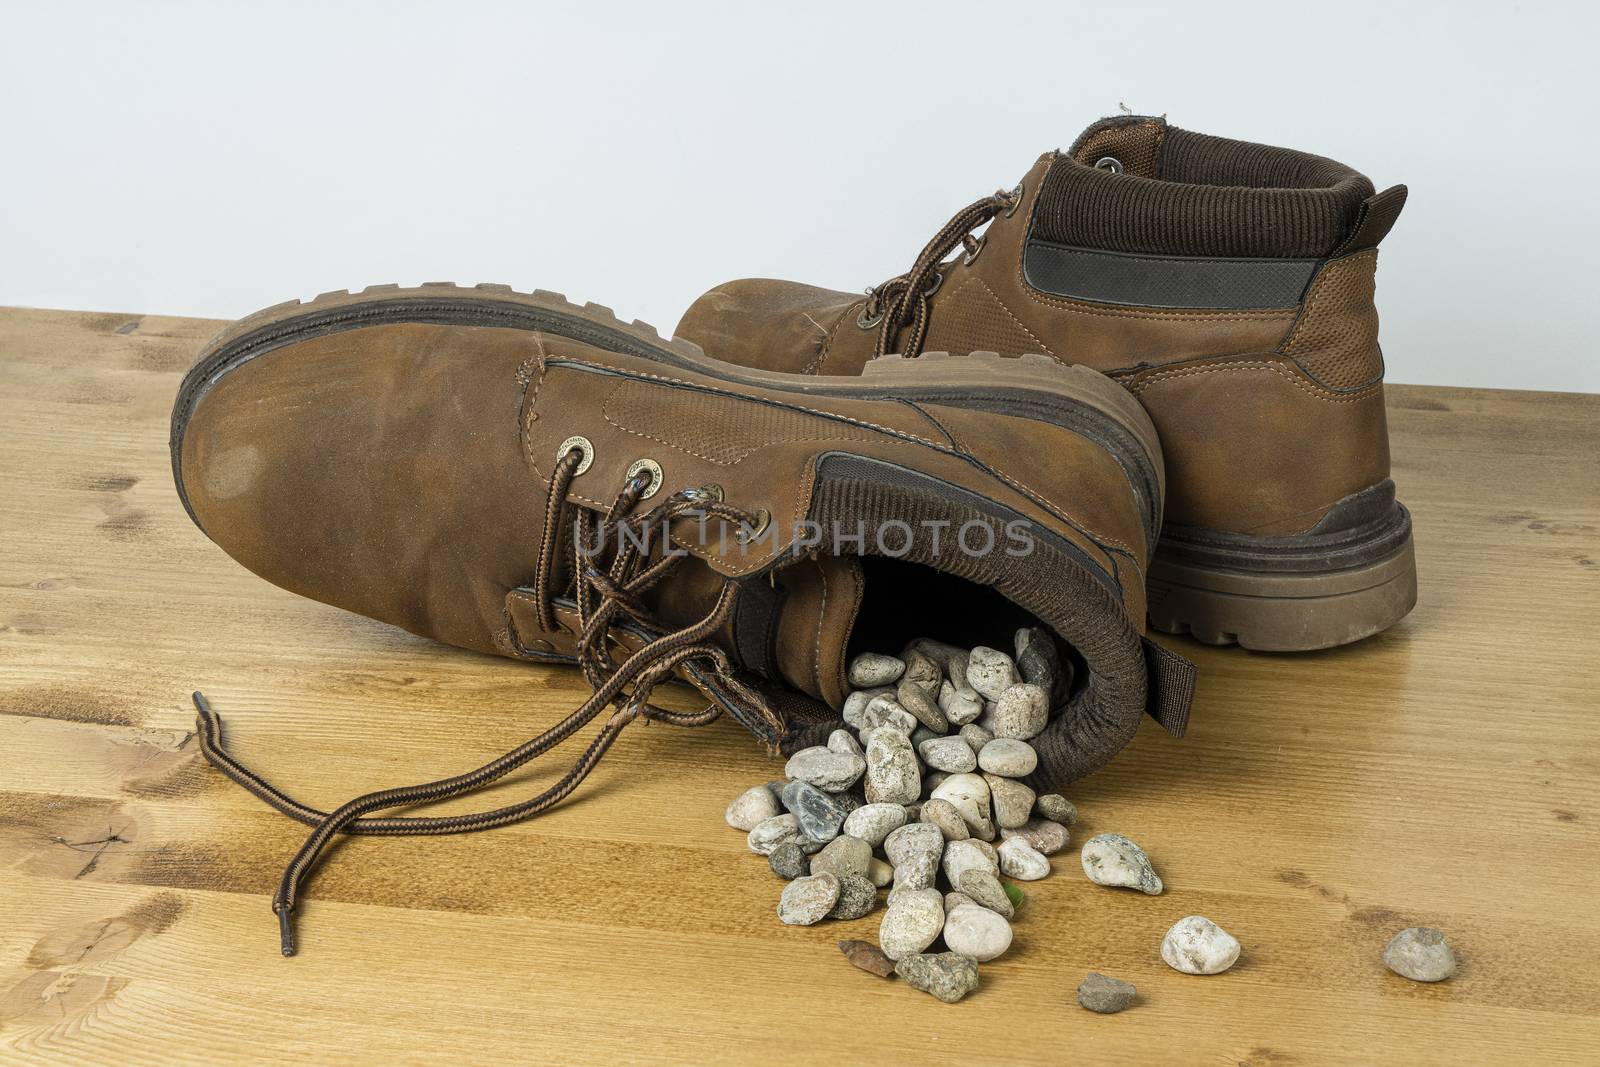 remove the gravel from your shoes by sergiodv